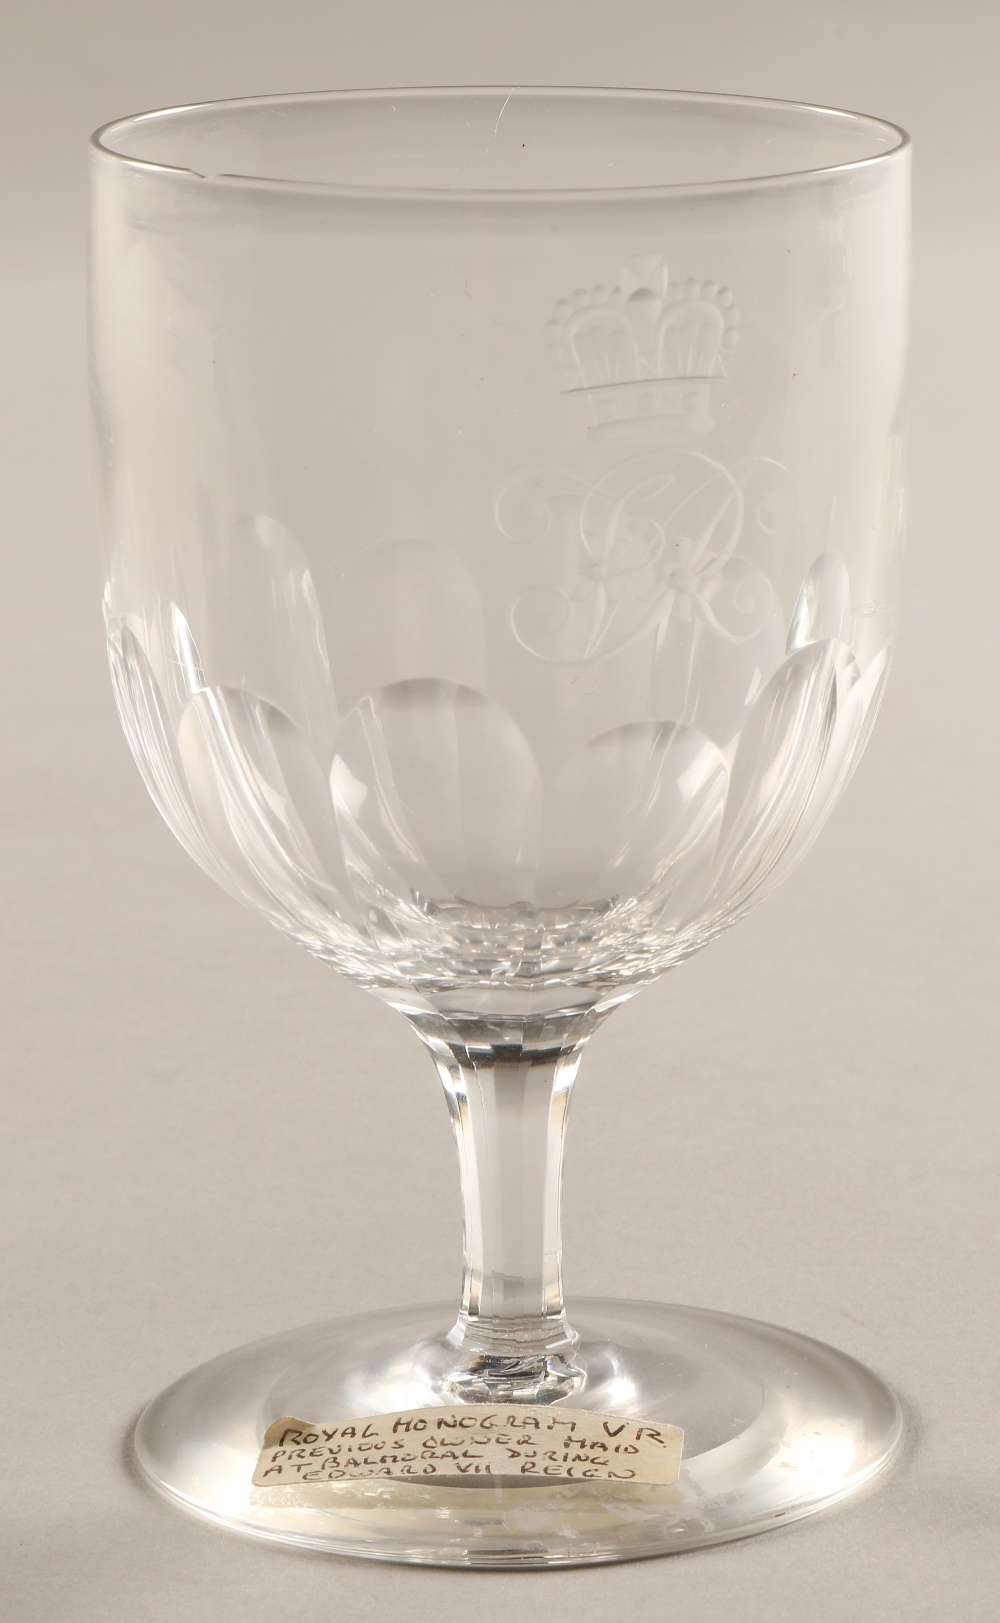 Victorian Rummer glass, with monogram VR, 15 cm high in presentation box. - Image 2 of 3